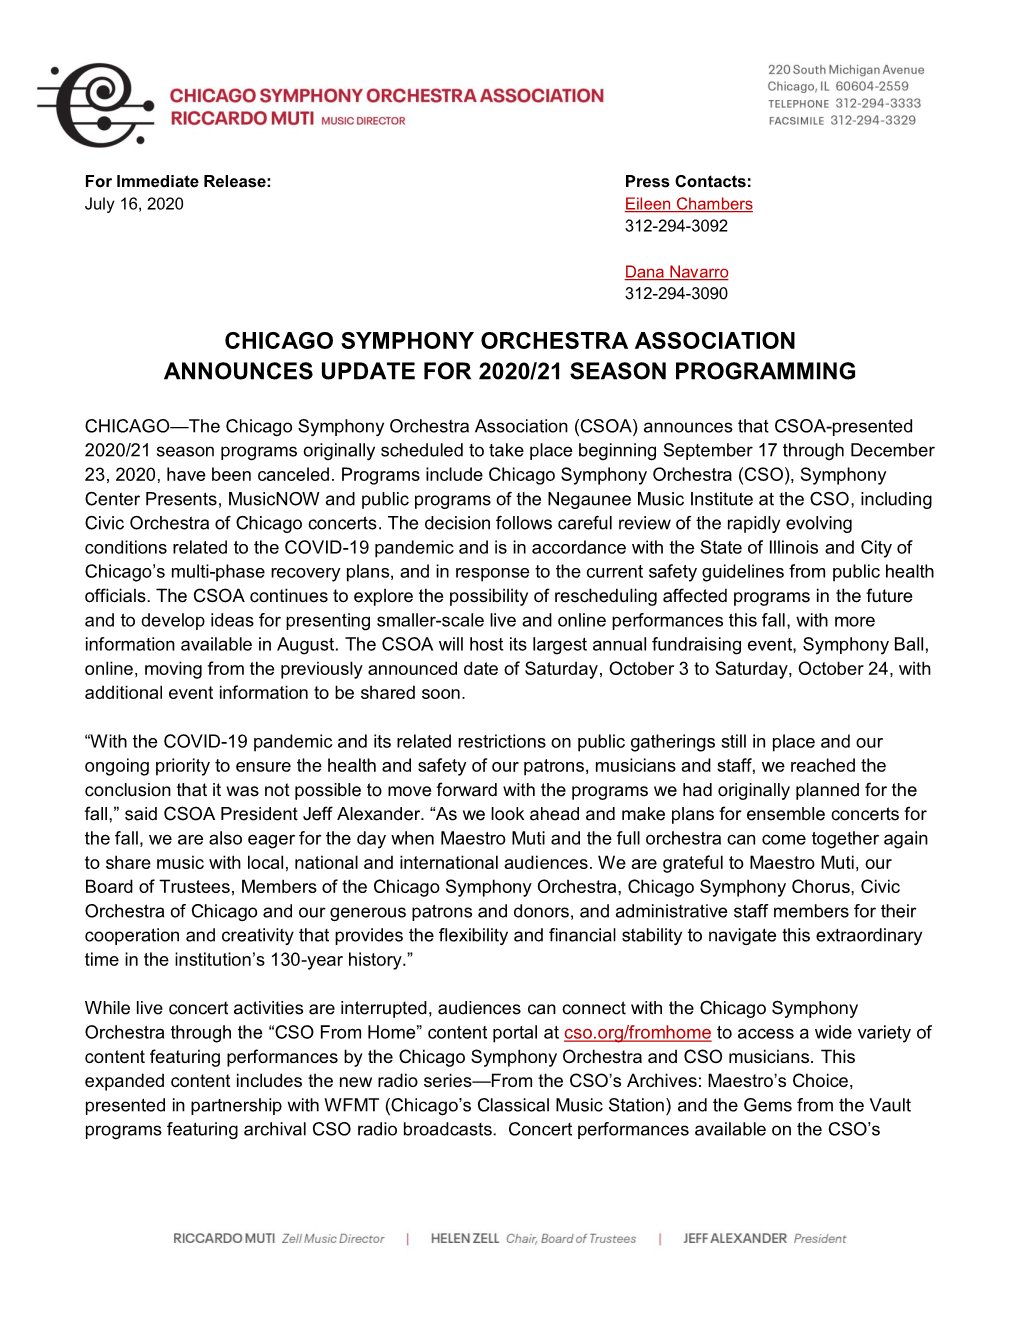 Chicago Symphony Orchestra Association Announces Update for 2020/21 Season Programming